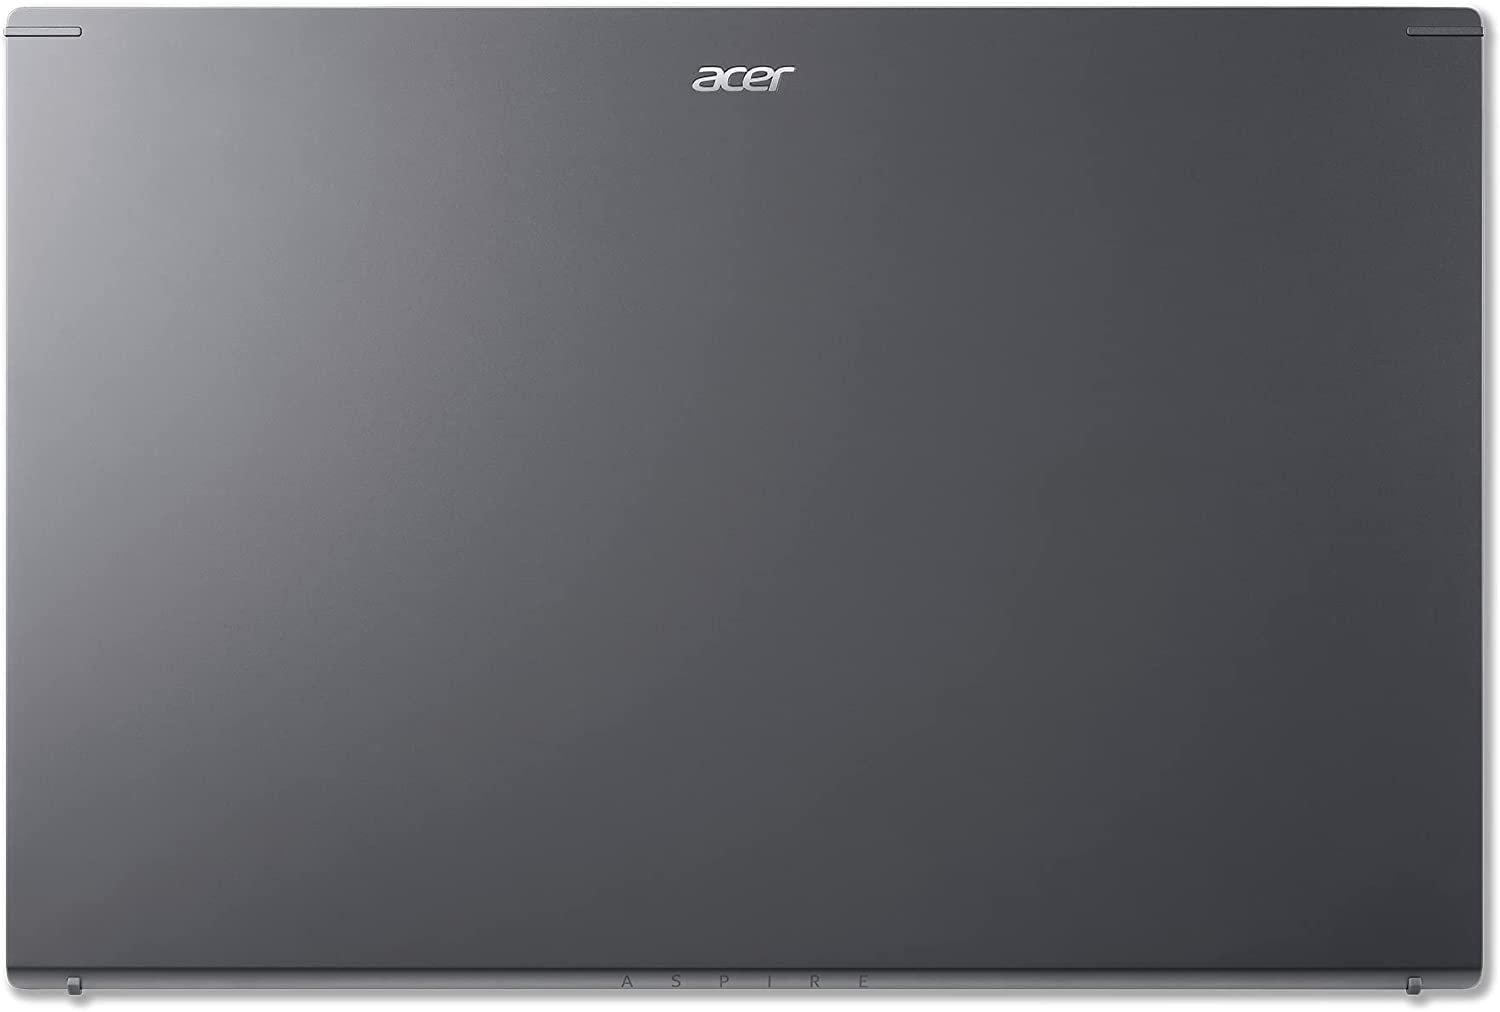 acer in nepal, acer aspire series in nepal, acer laptop in nepal, acer aspire 5 laptop in nepal, acer aspire 5 laptop price in nepal